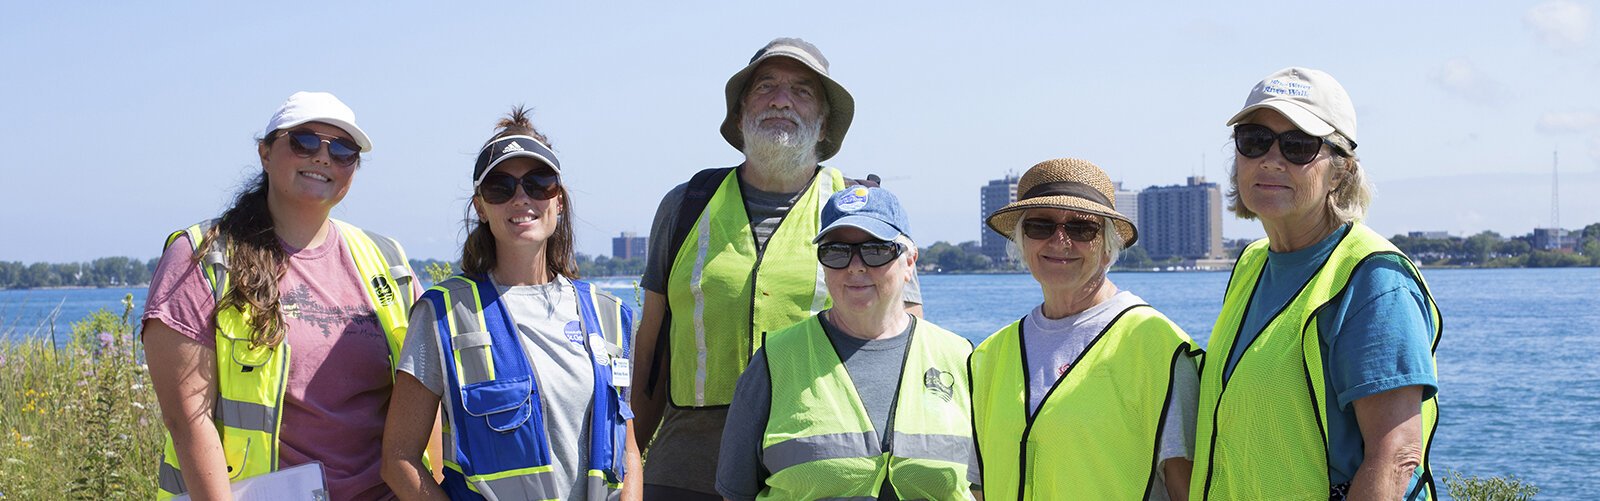 Friends of the St. Clair River staff and volunteers (from left) Lily Smalstig, Melissa Kivel, Mark Harrison, Chris Danner, Ruth Habalewsky, and Barb Ford.